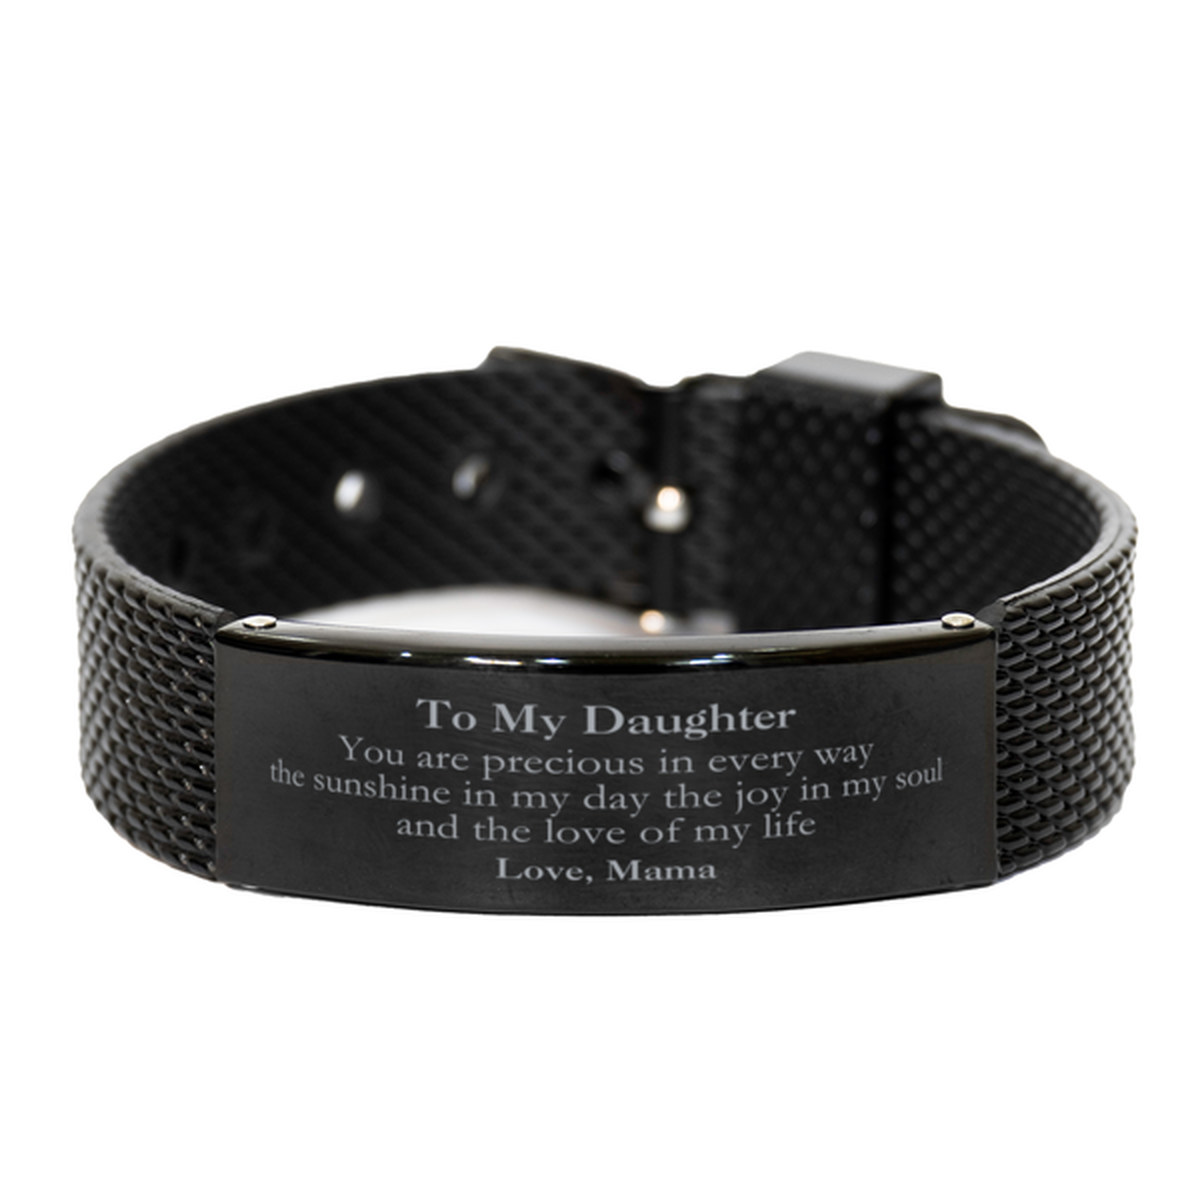 Graduation Gifts for Daughter Black Shark Mesh Bracelet Present from Mama, Christmas Daughter Birthday Gifts Daughter You are precious in every way the sunshine in my day. Love, Mama